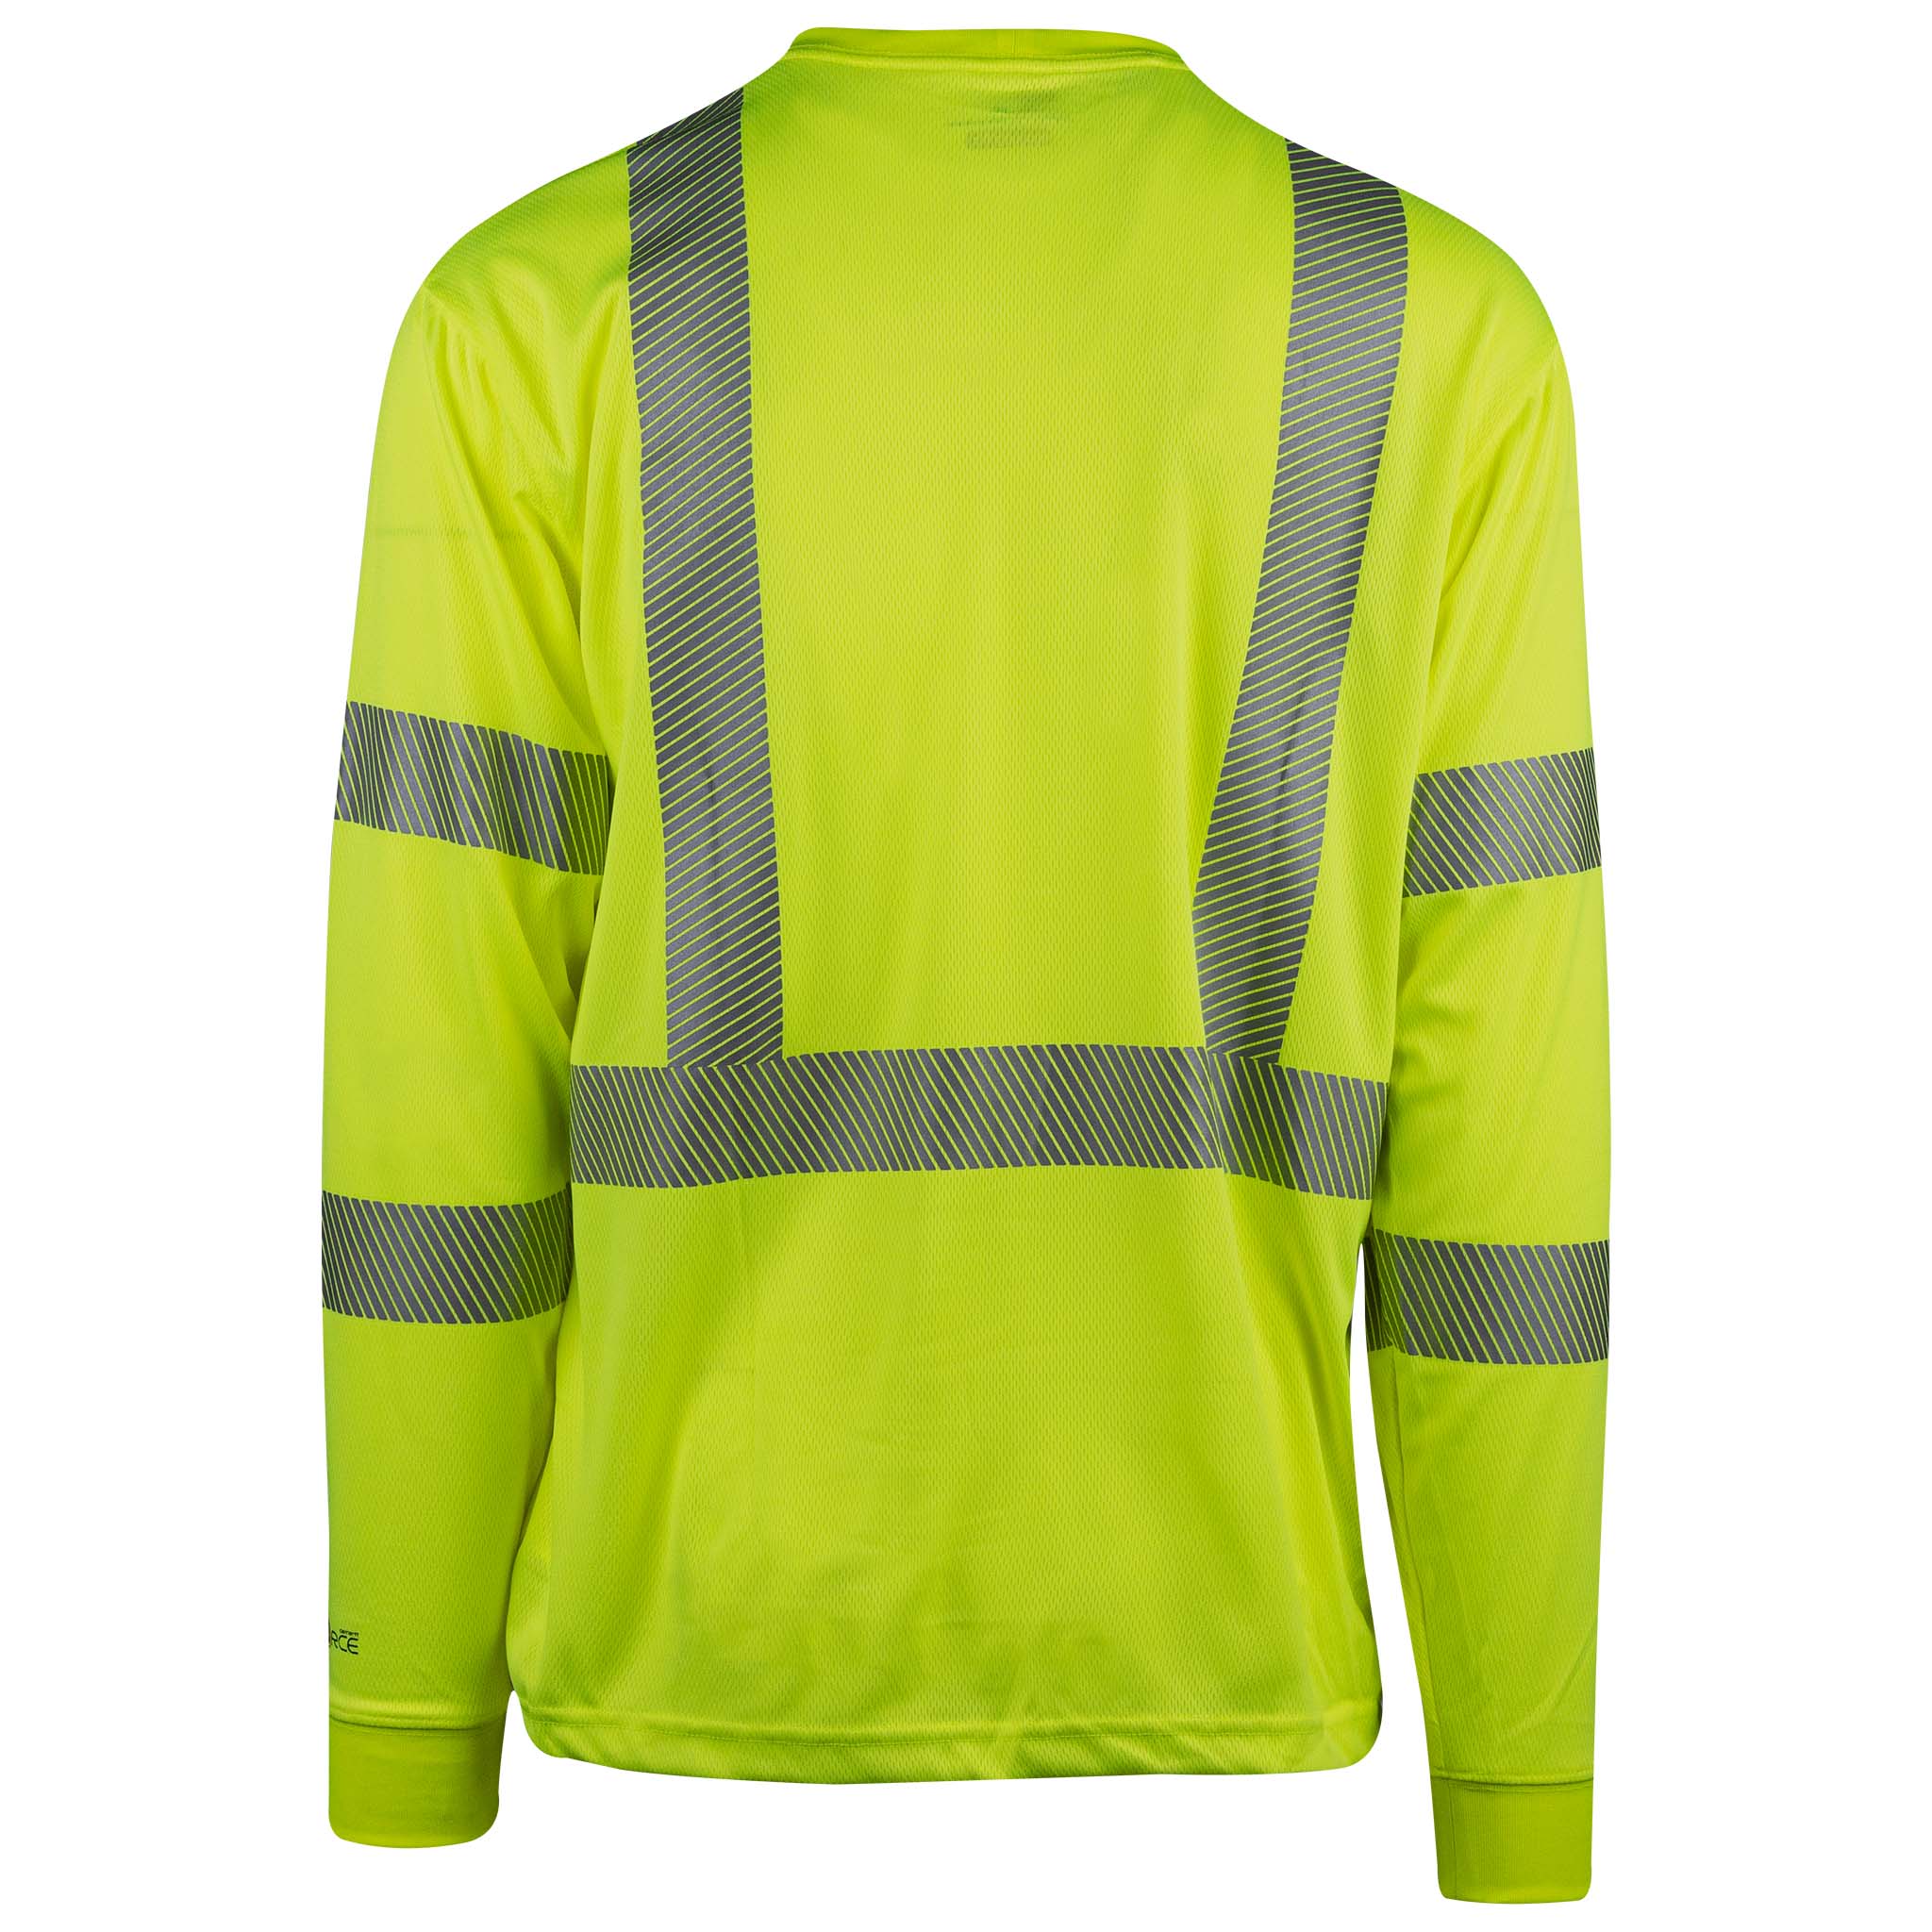 Carhartt L/S High Visibility Class 3 Yellow Back